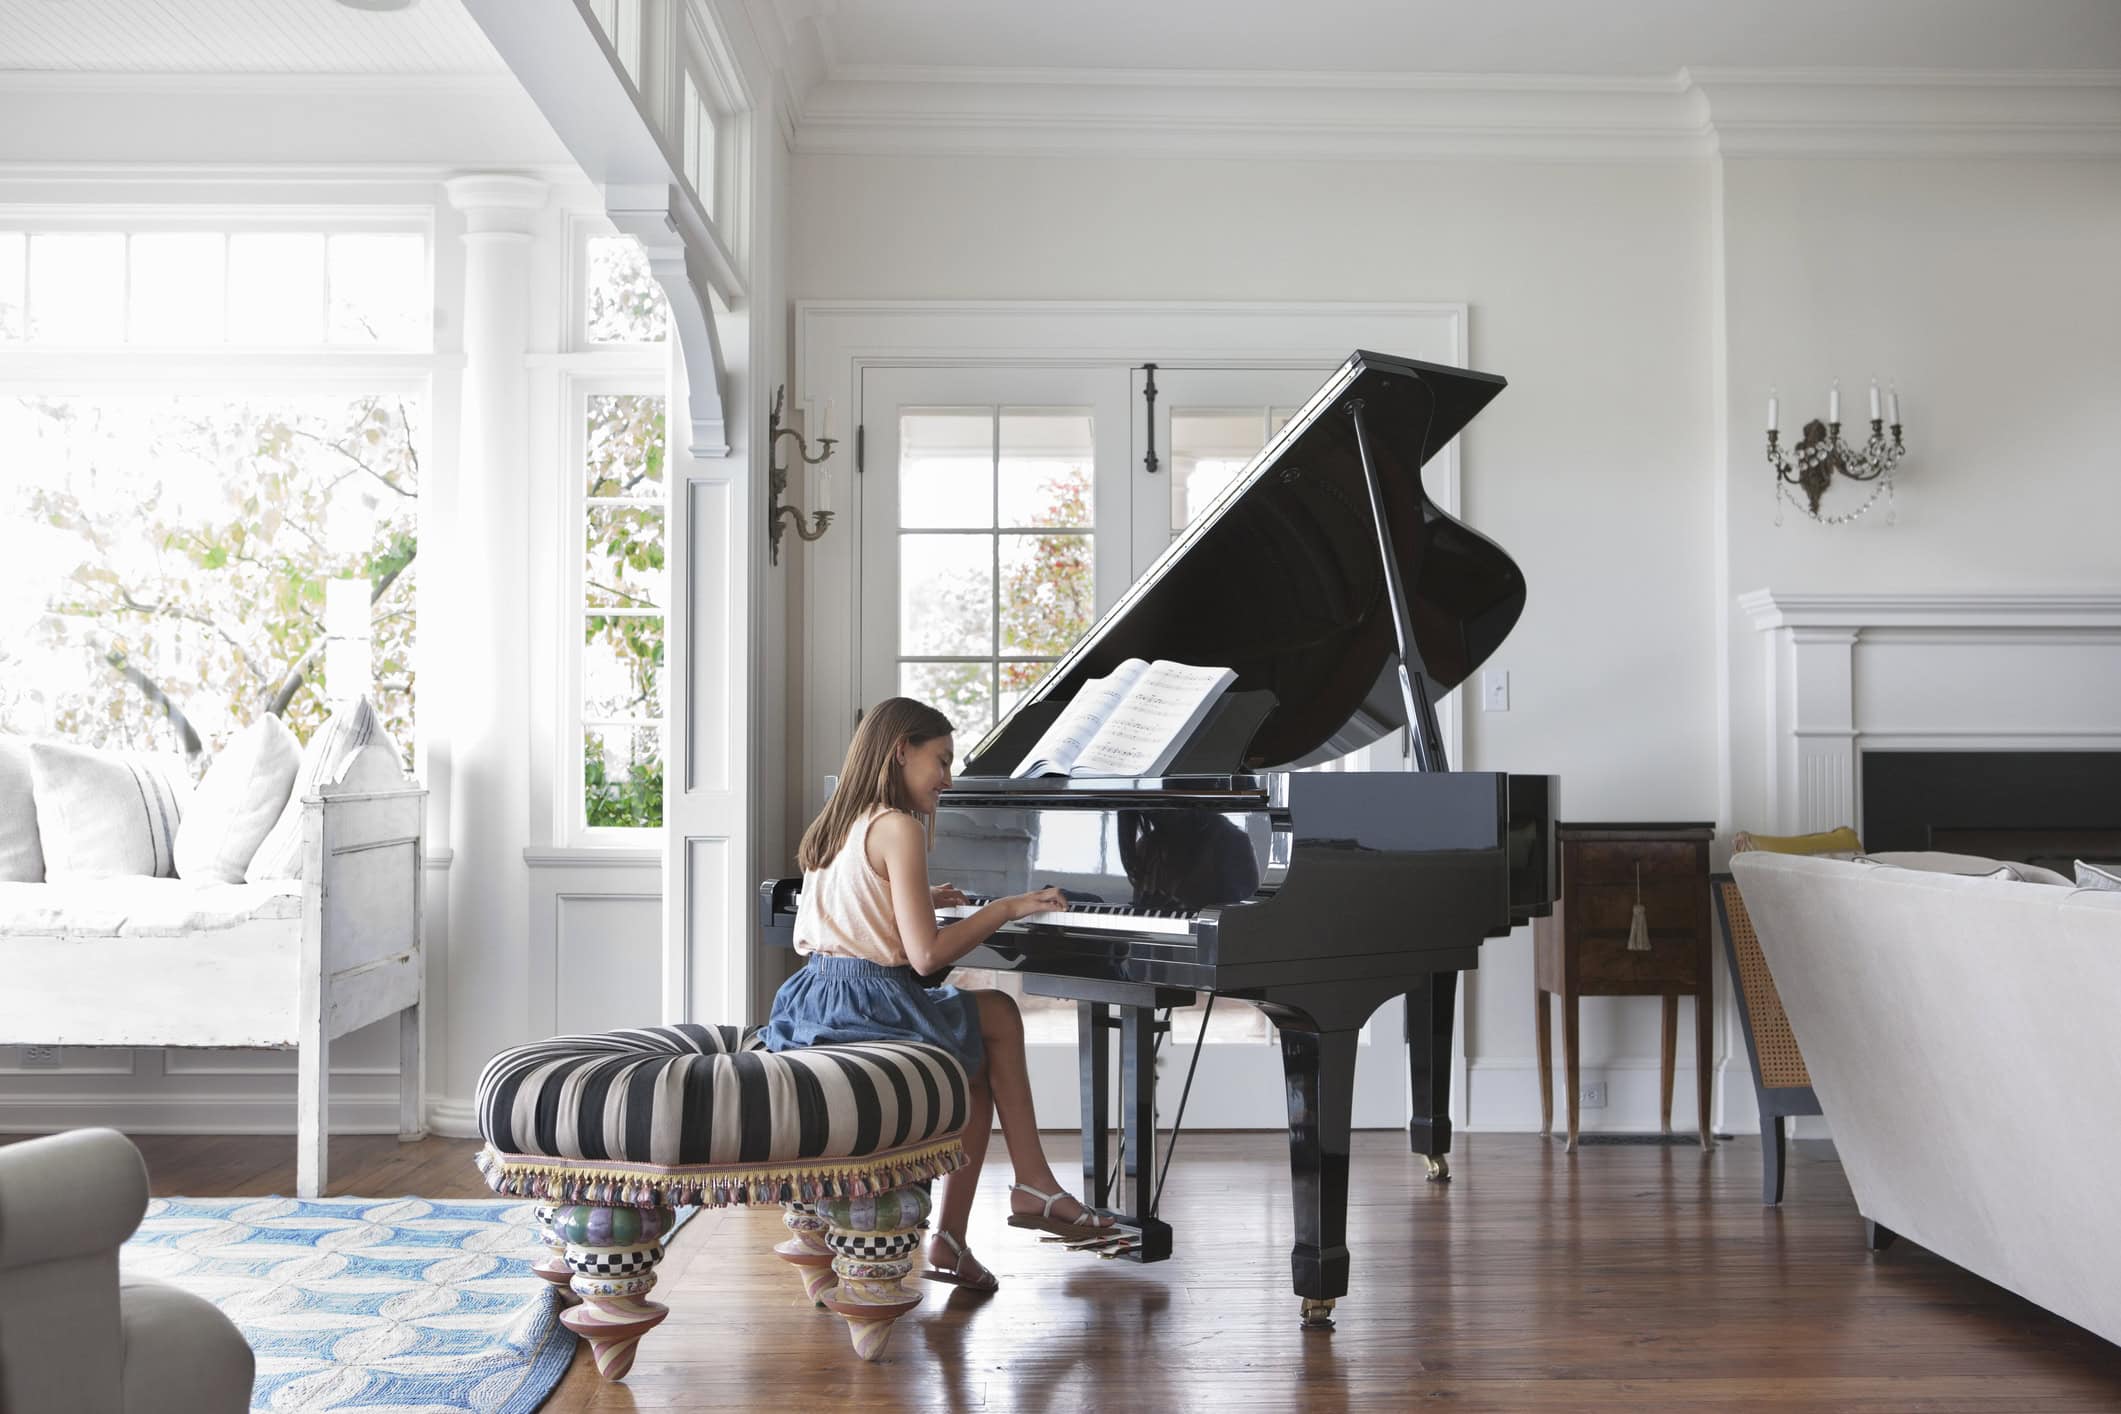 Smiling girl playing baby grand piano in living room of home.